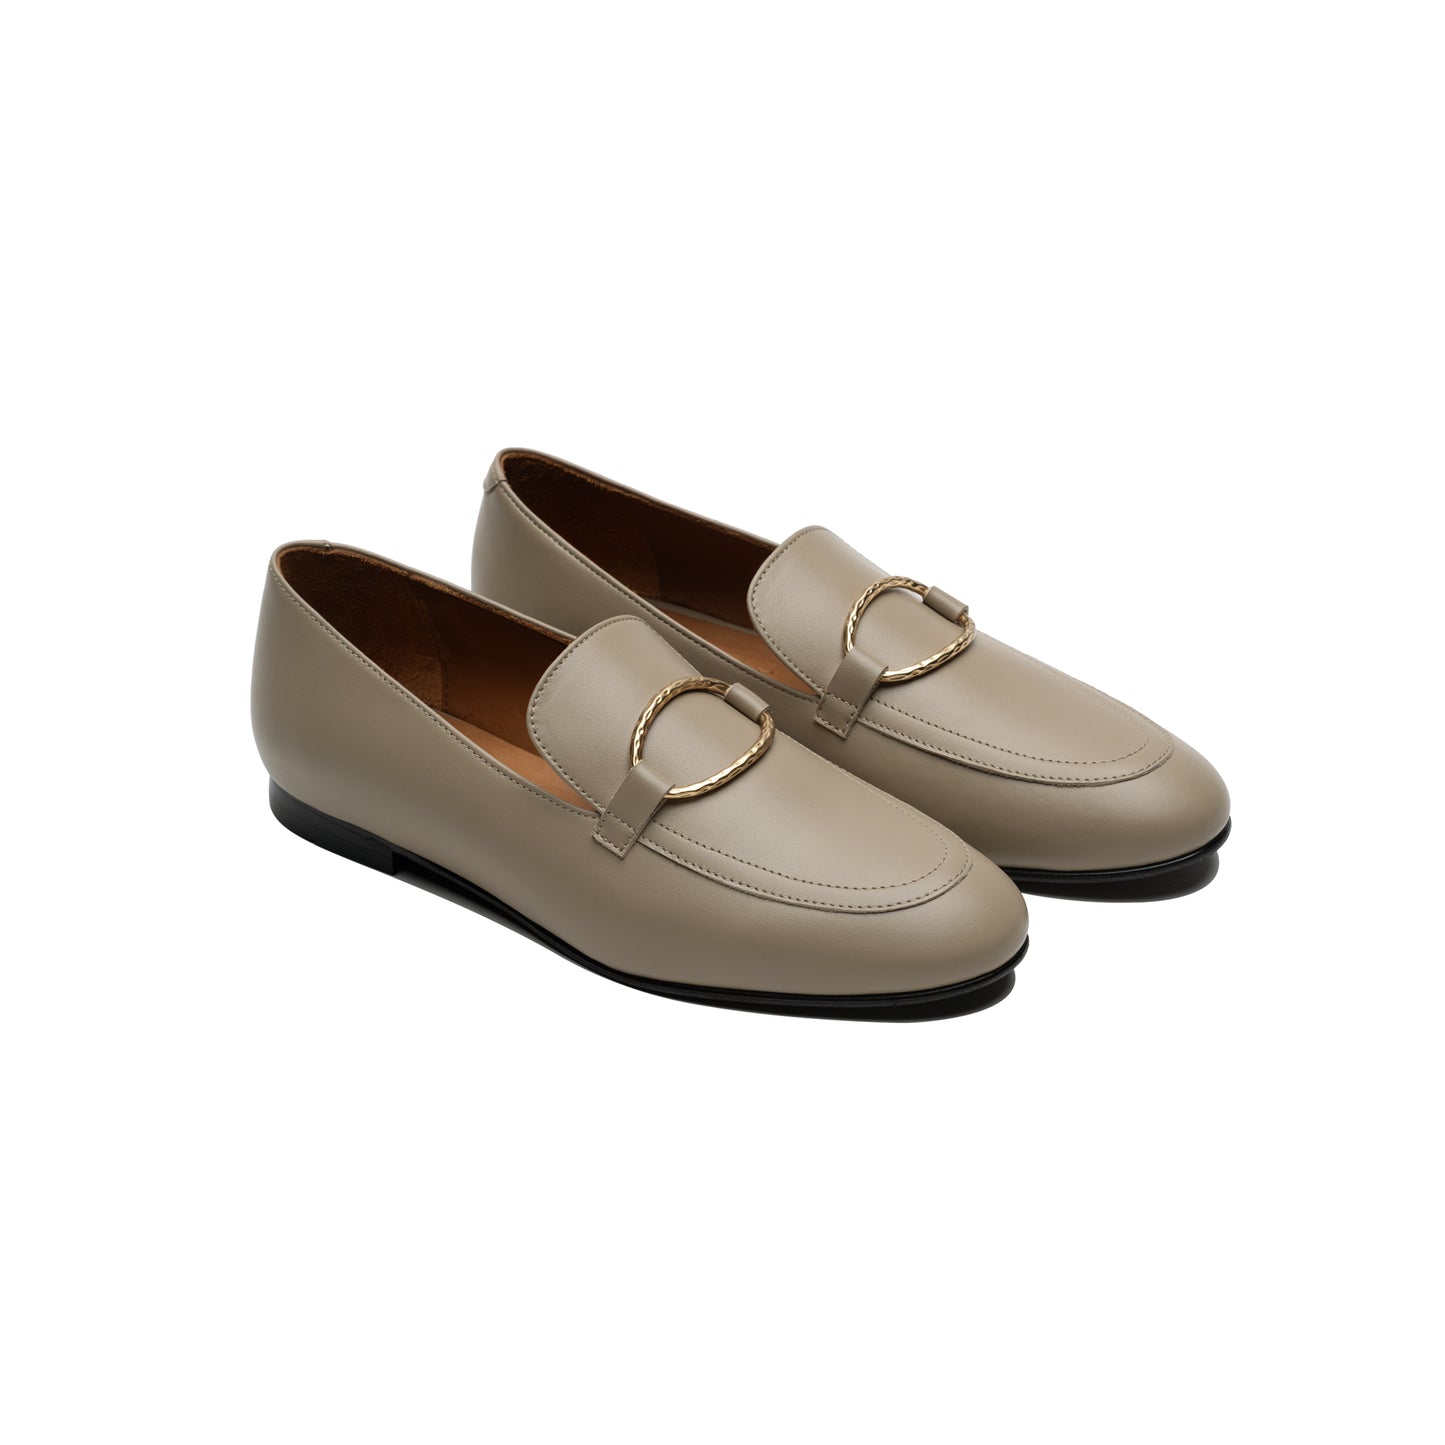 Taupe Tomboy Chic Loafers